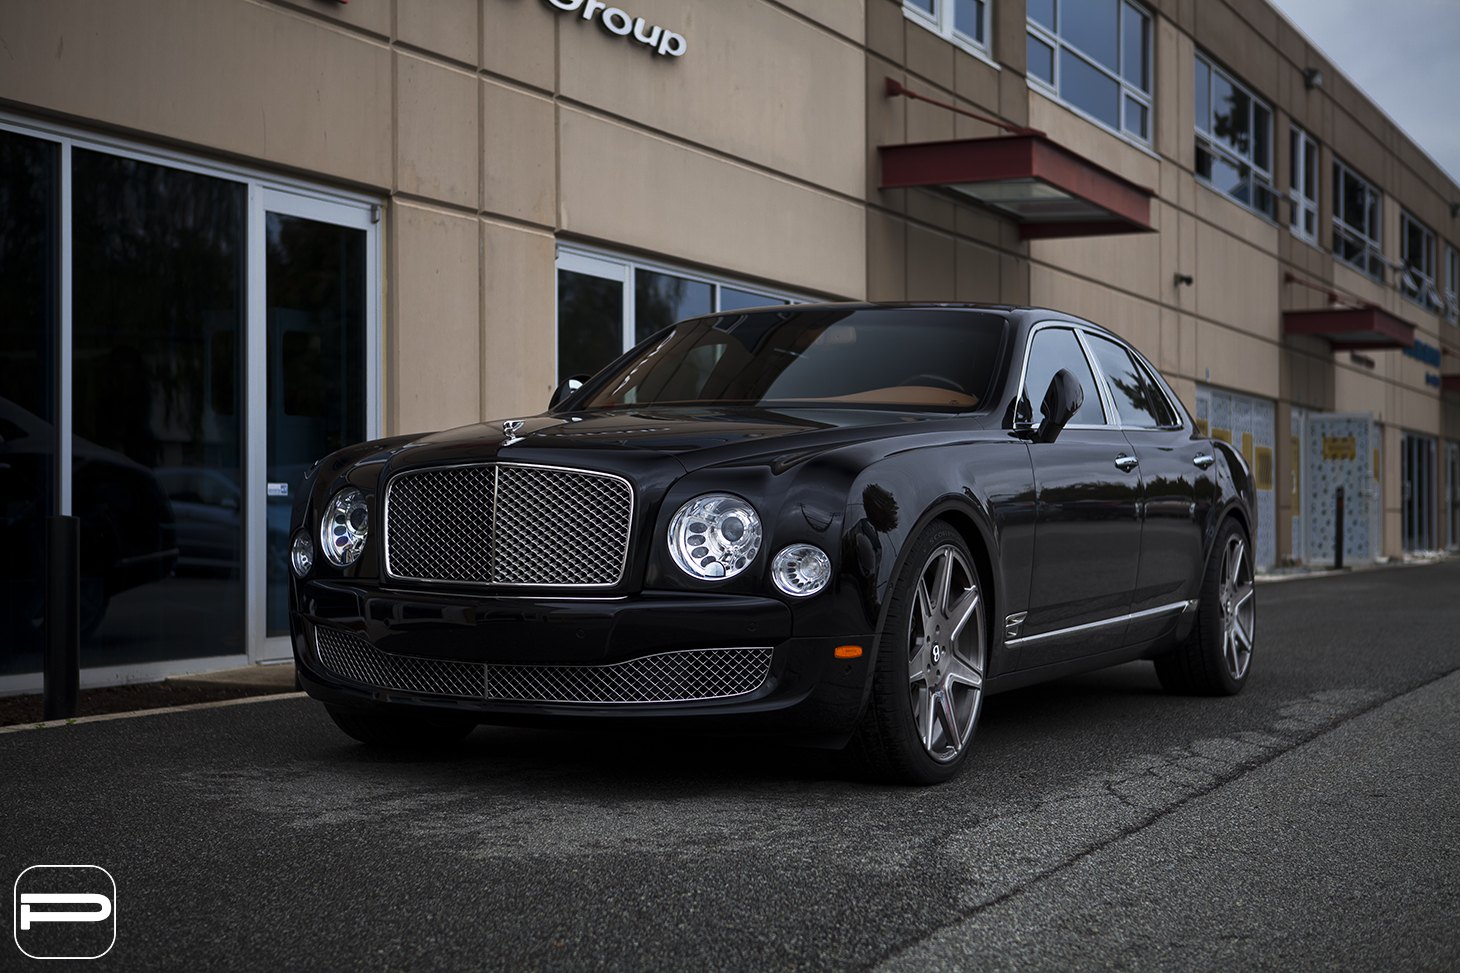 Black Bentley Mulsanne with Chrome Mesh Grille - Photo by PUR Wheels